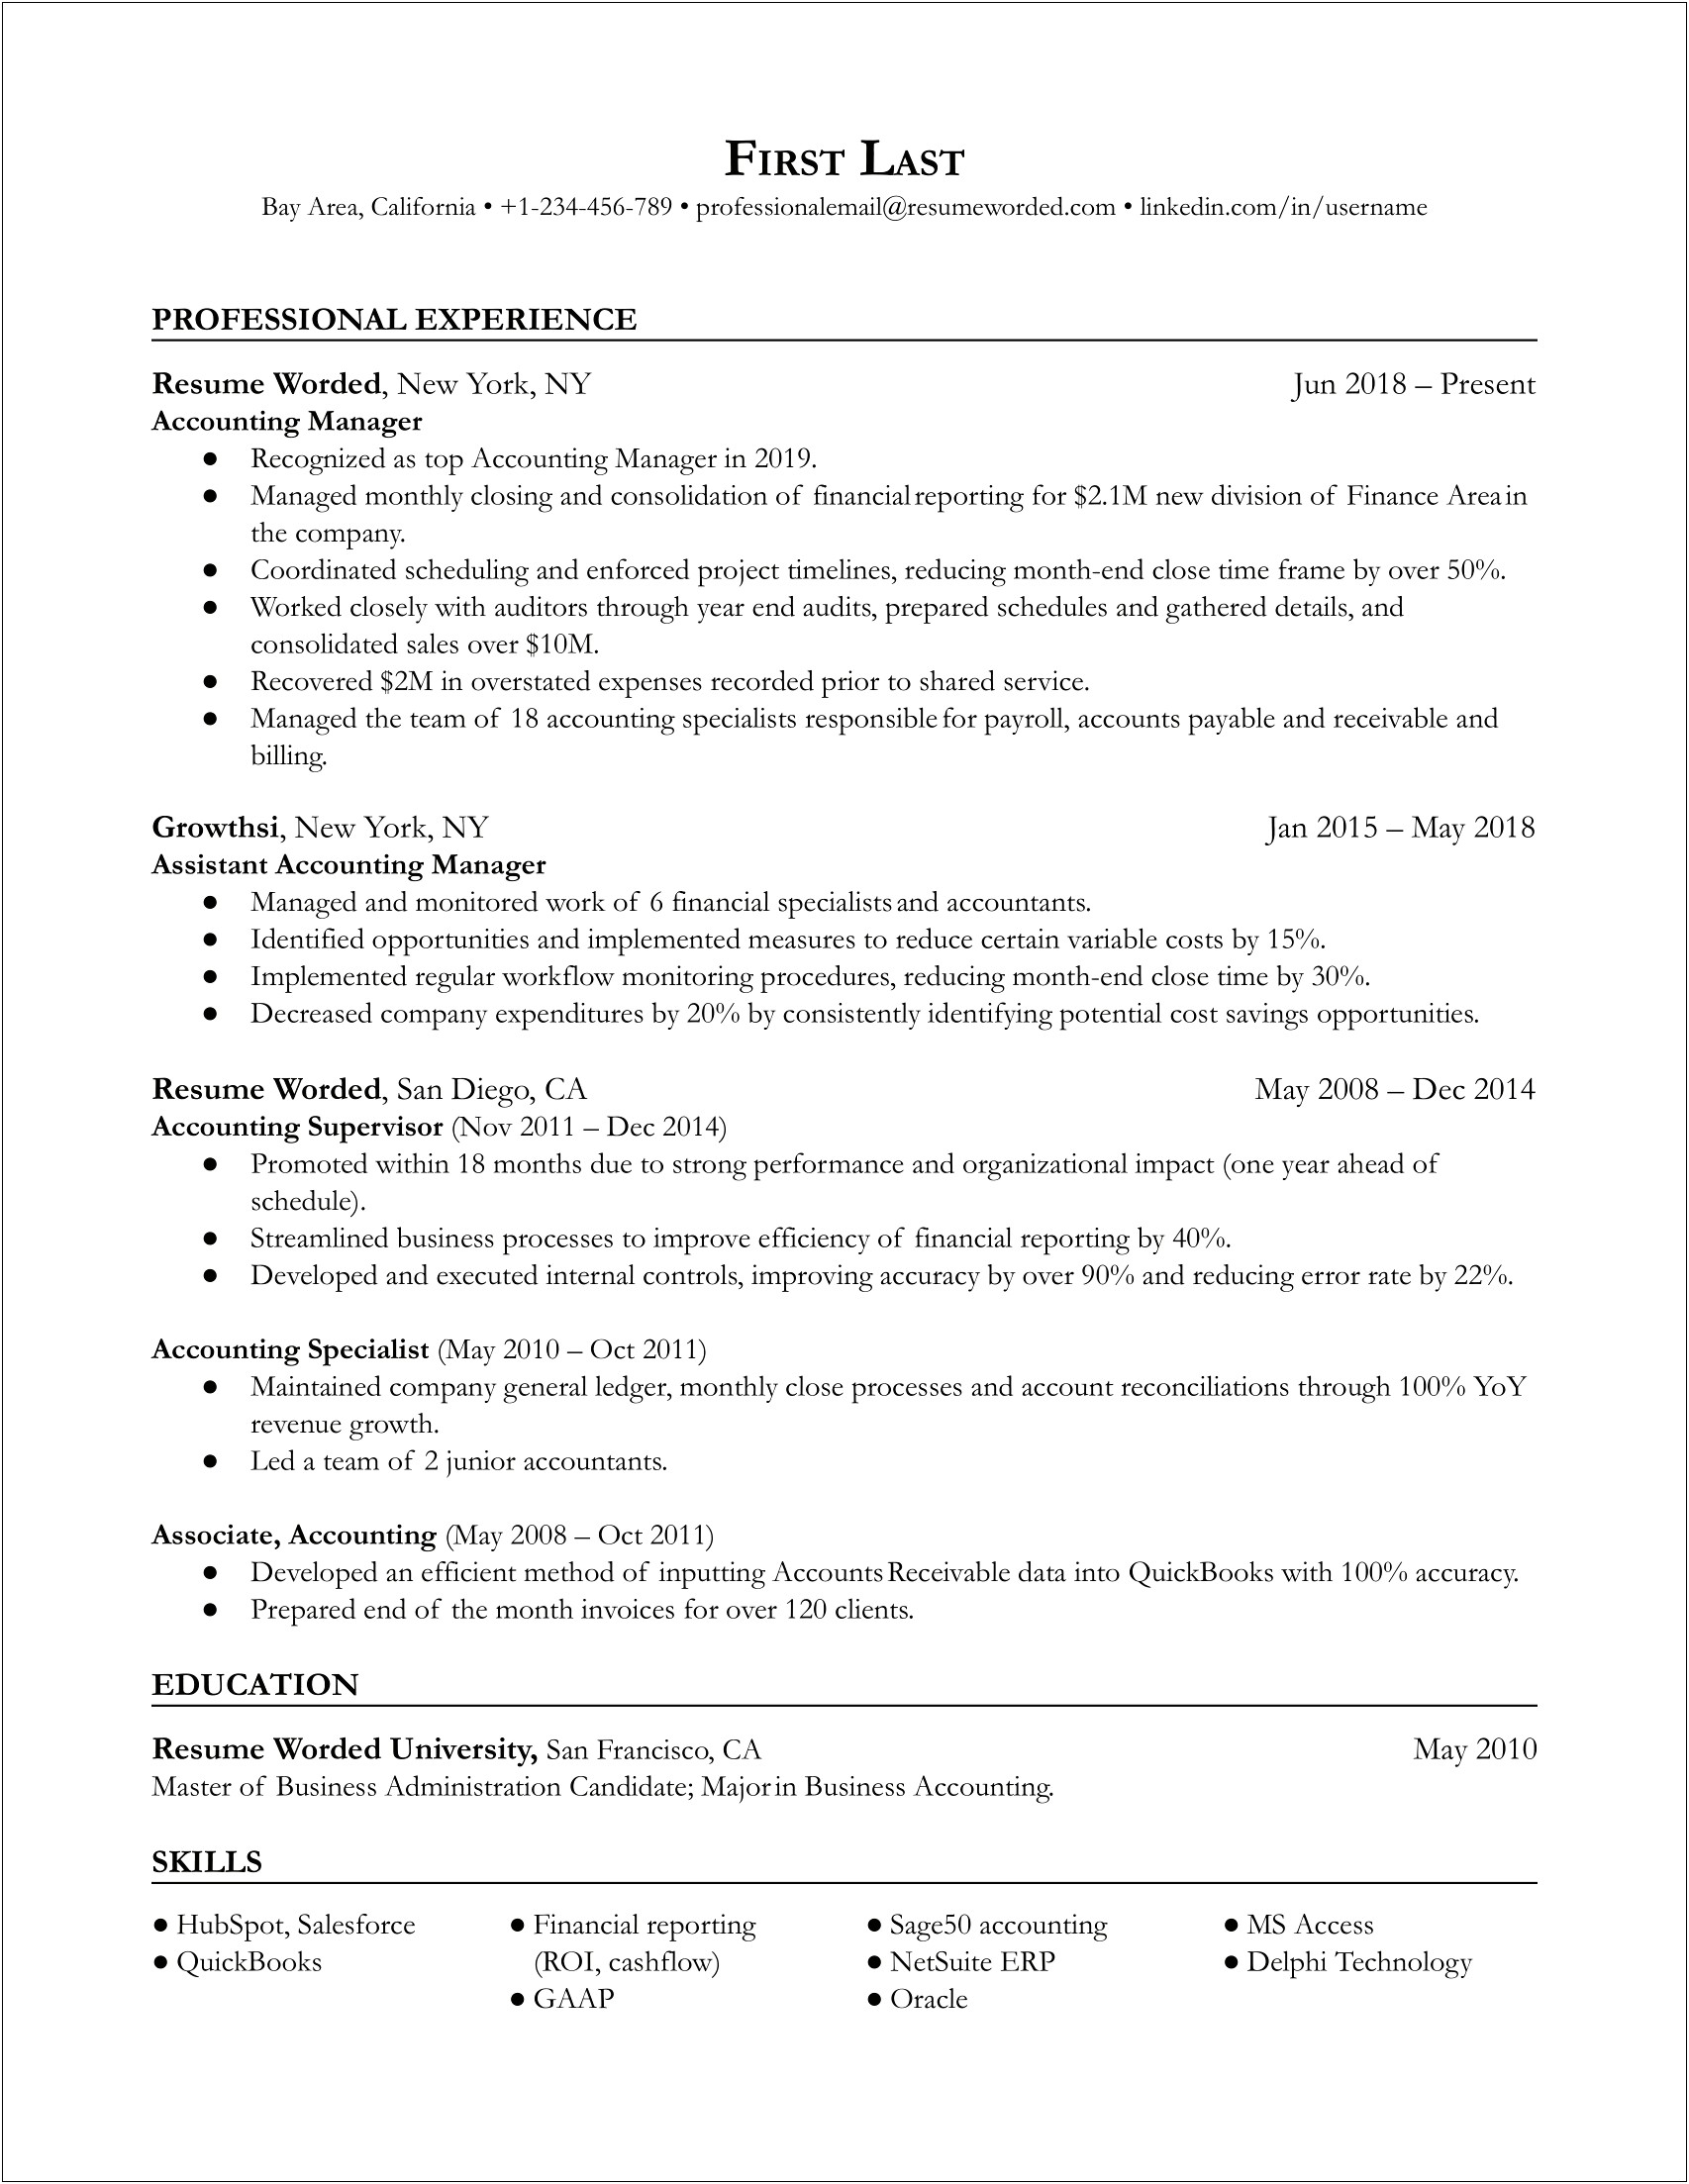 One Year Experience Resume Format For Accountant